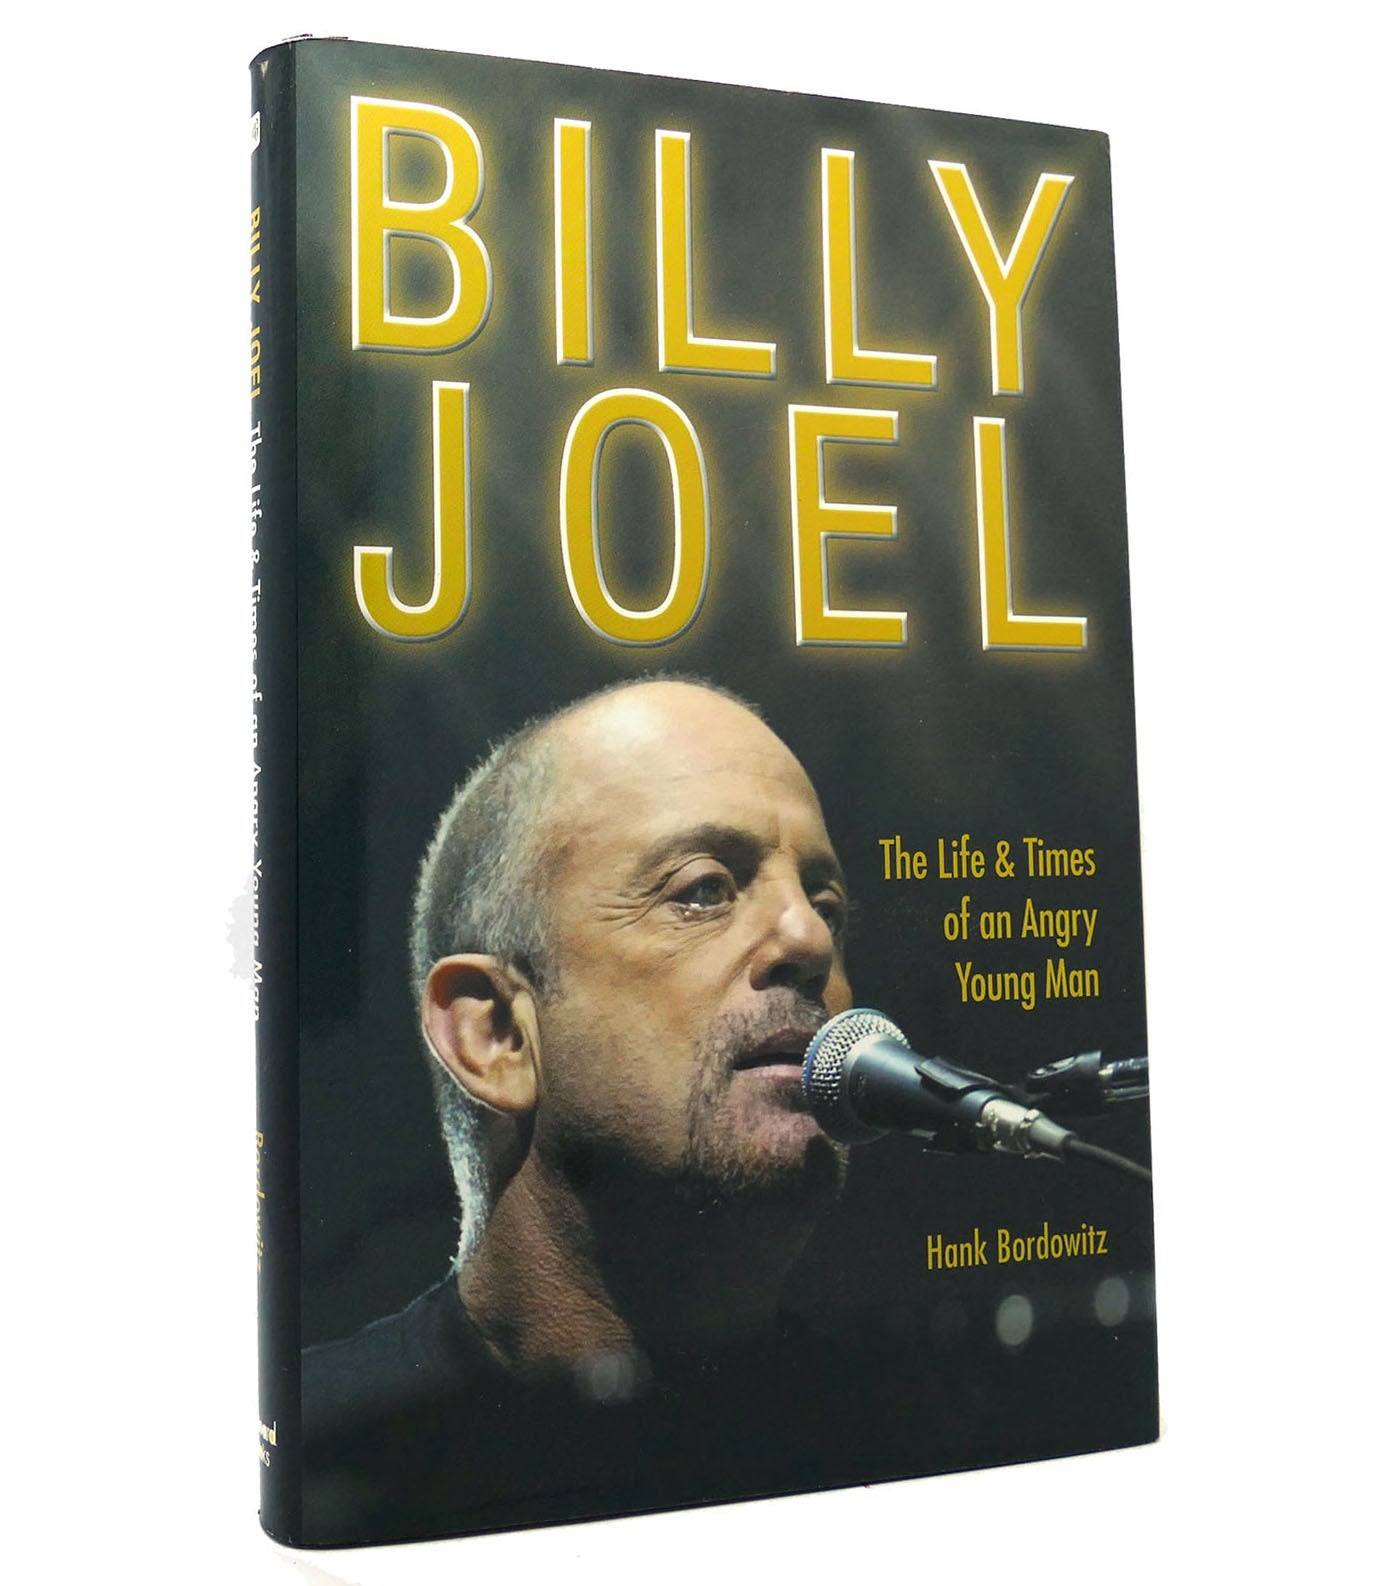 BILLY JOEL The Life and Times of an Angry Young Man | Hank Bordowitz